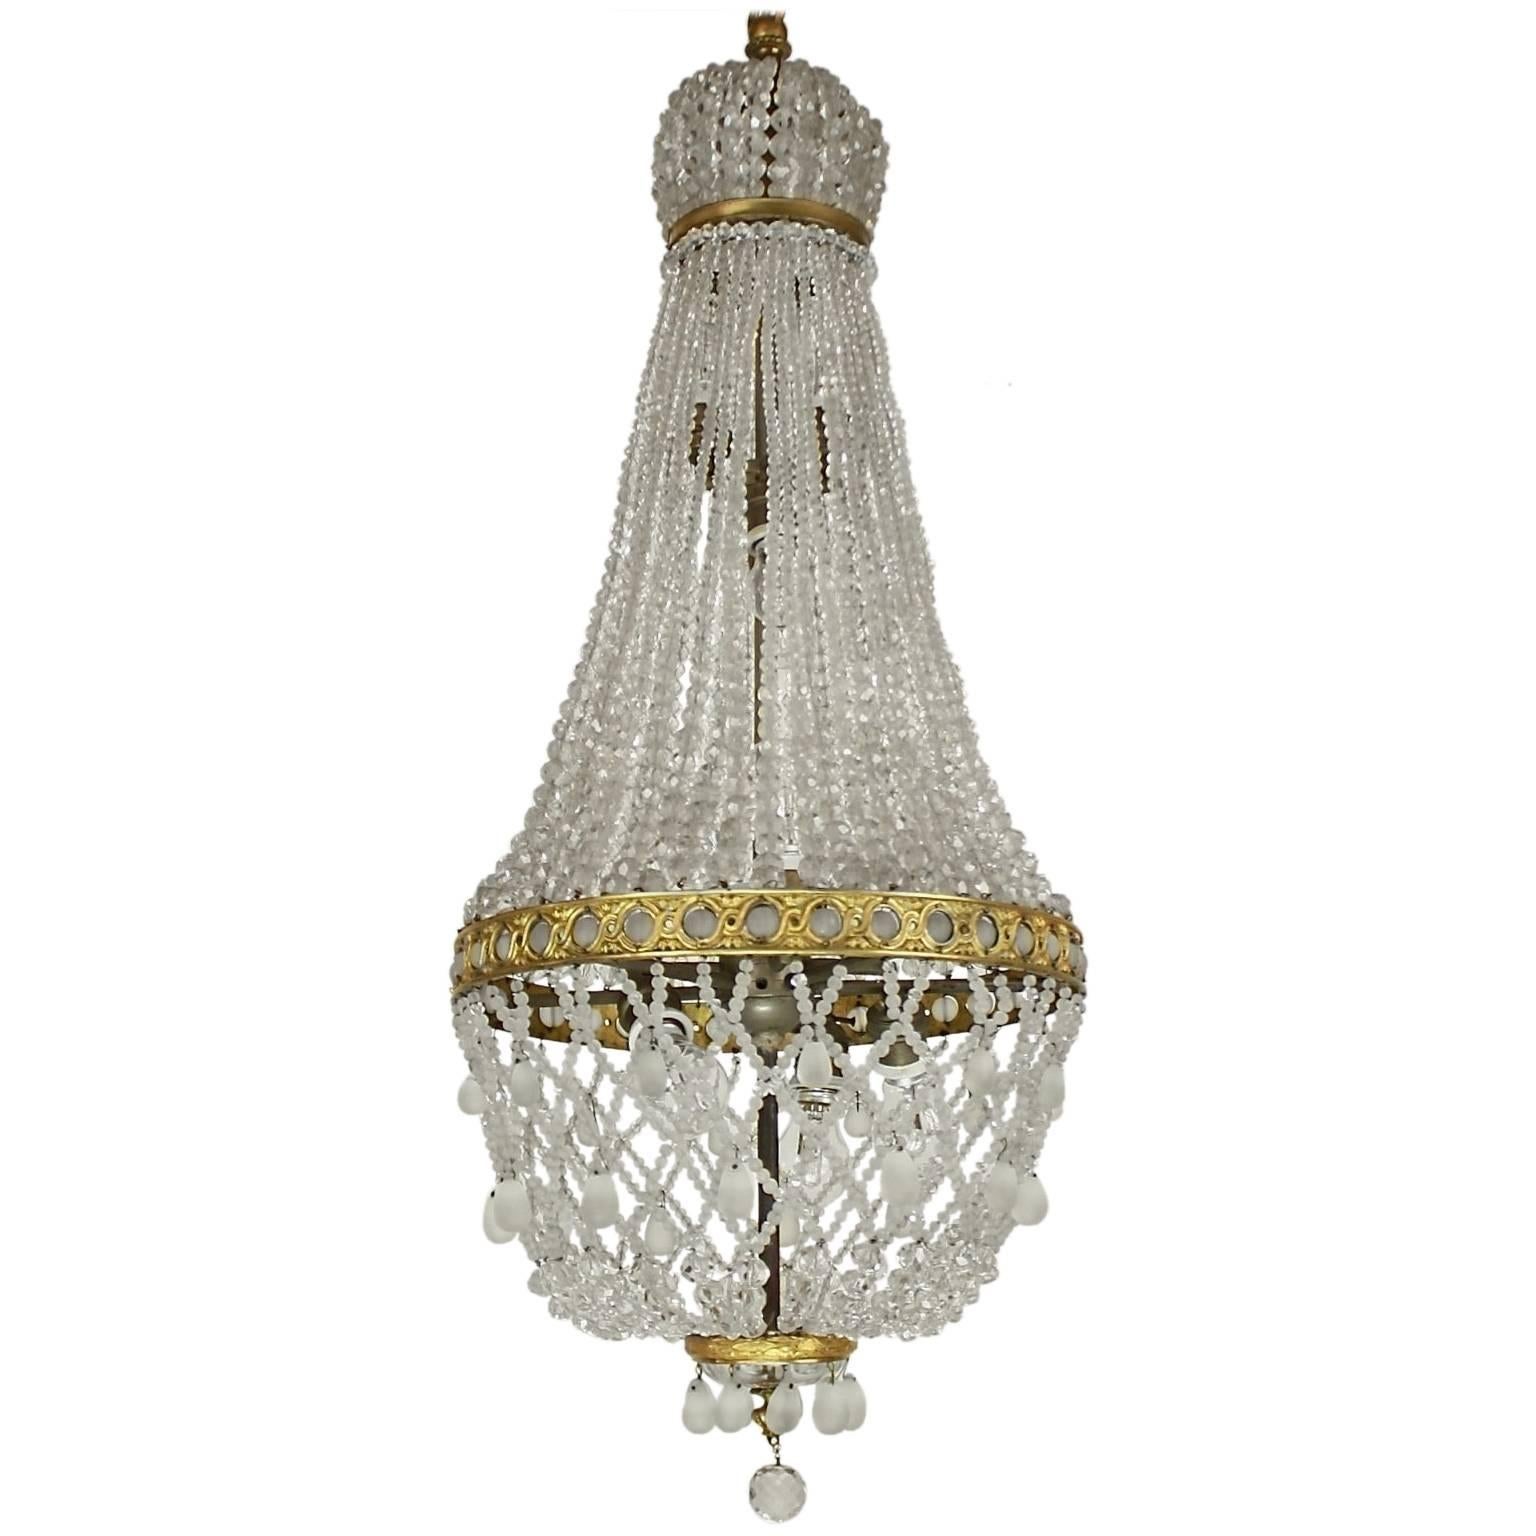 Fine French Empire Style Cut-Crystal Tent and Bag Chandelier